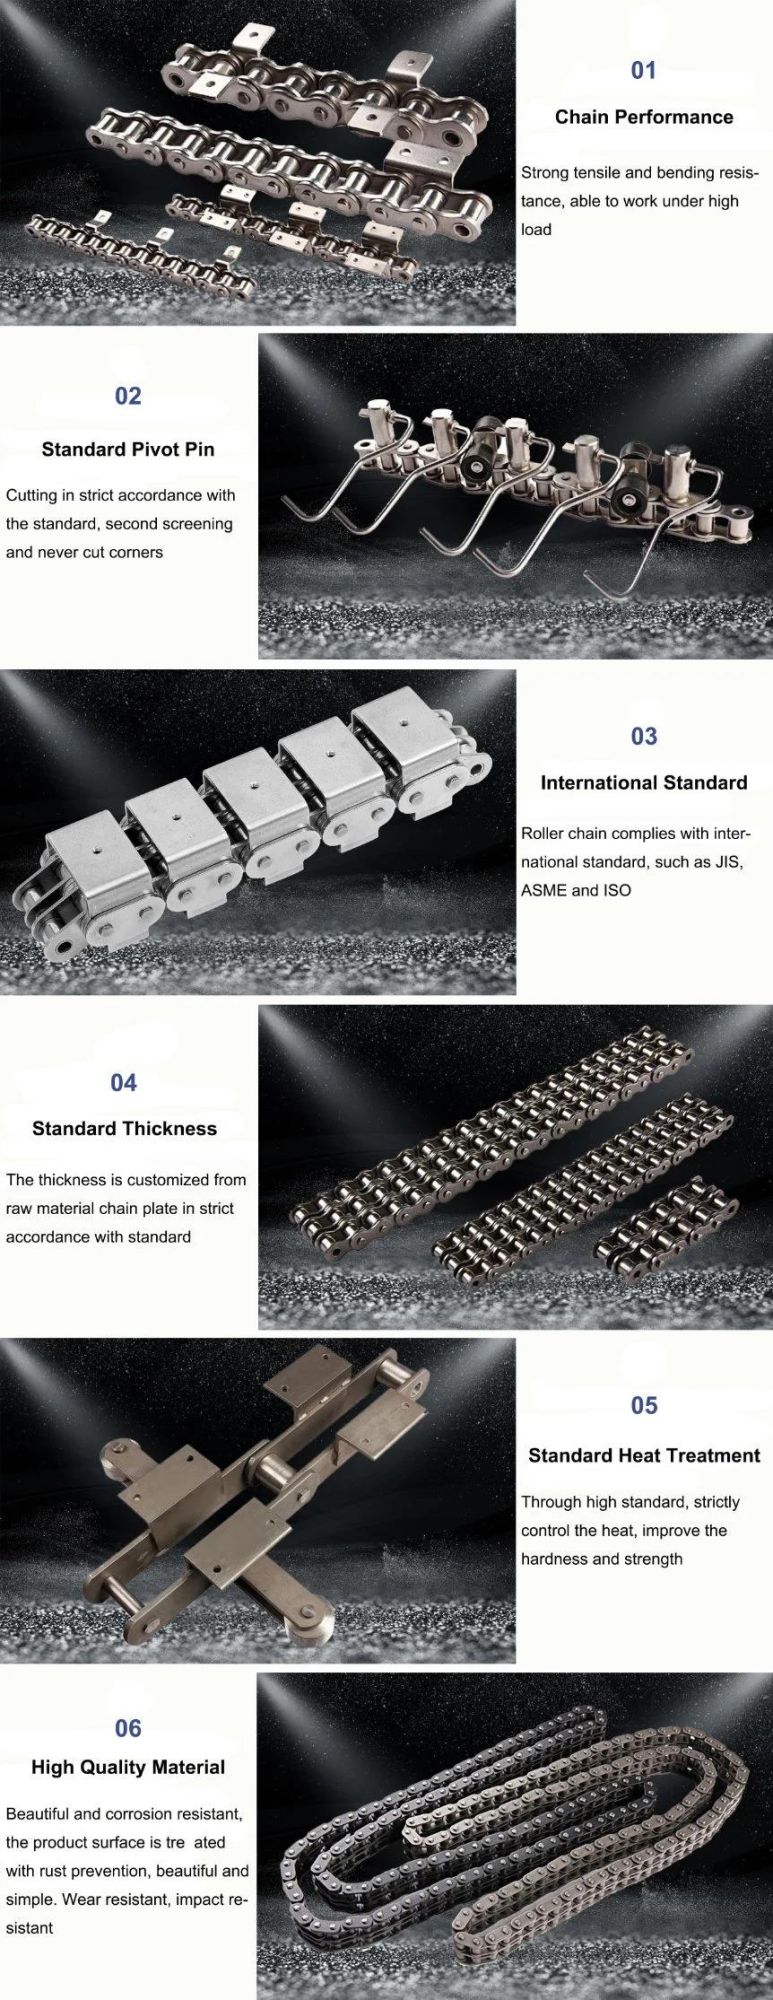 Customized Service Industrial Fv40 Fv63 Fv90 Fv112 Single Hole Conveyor Roller Chain with Attachment